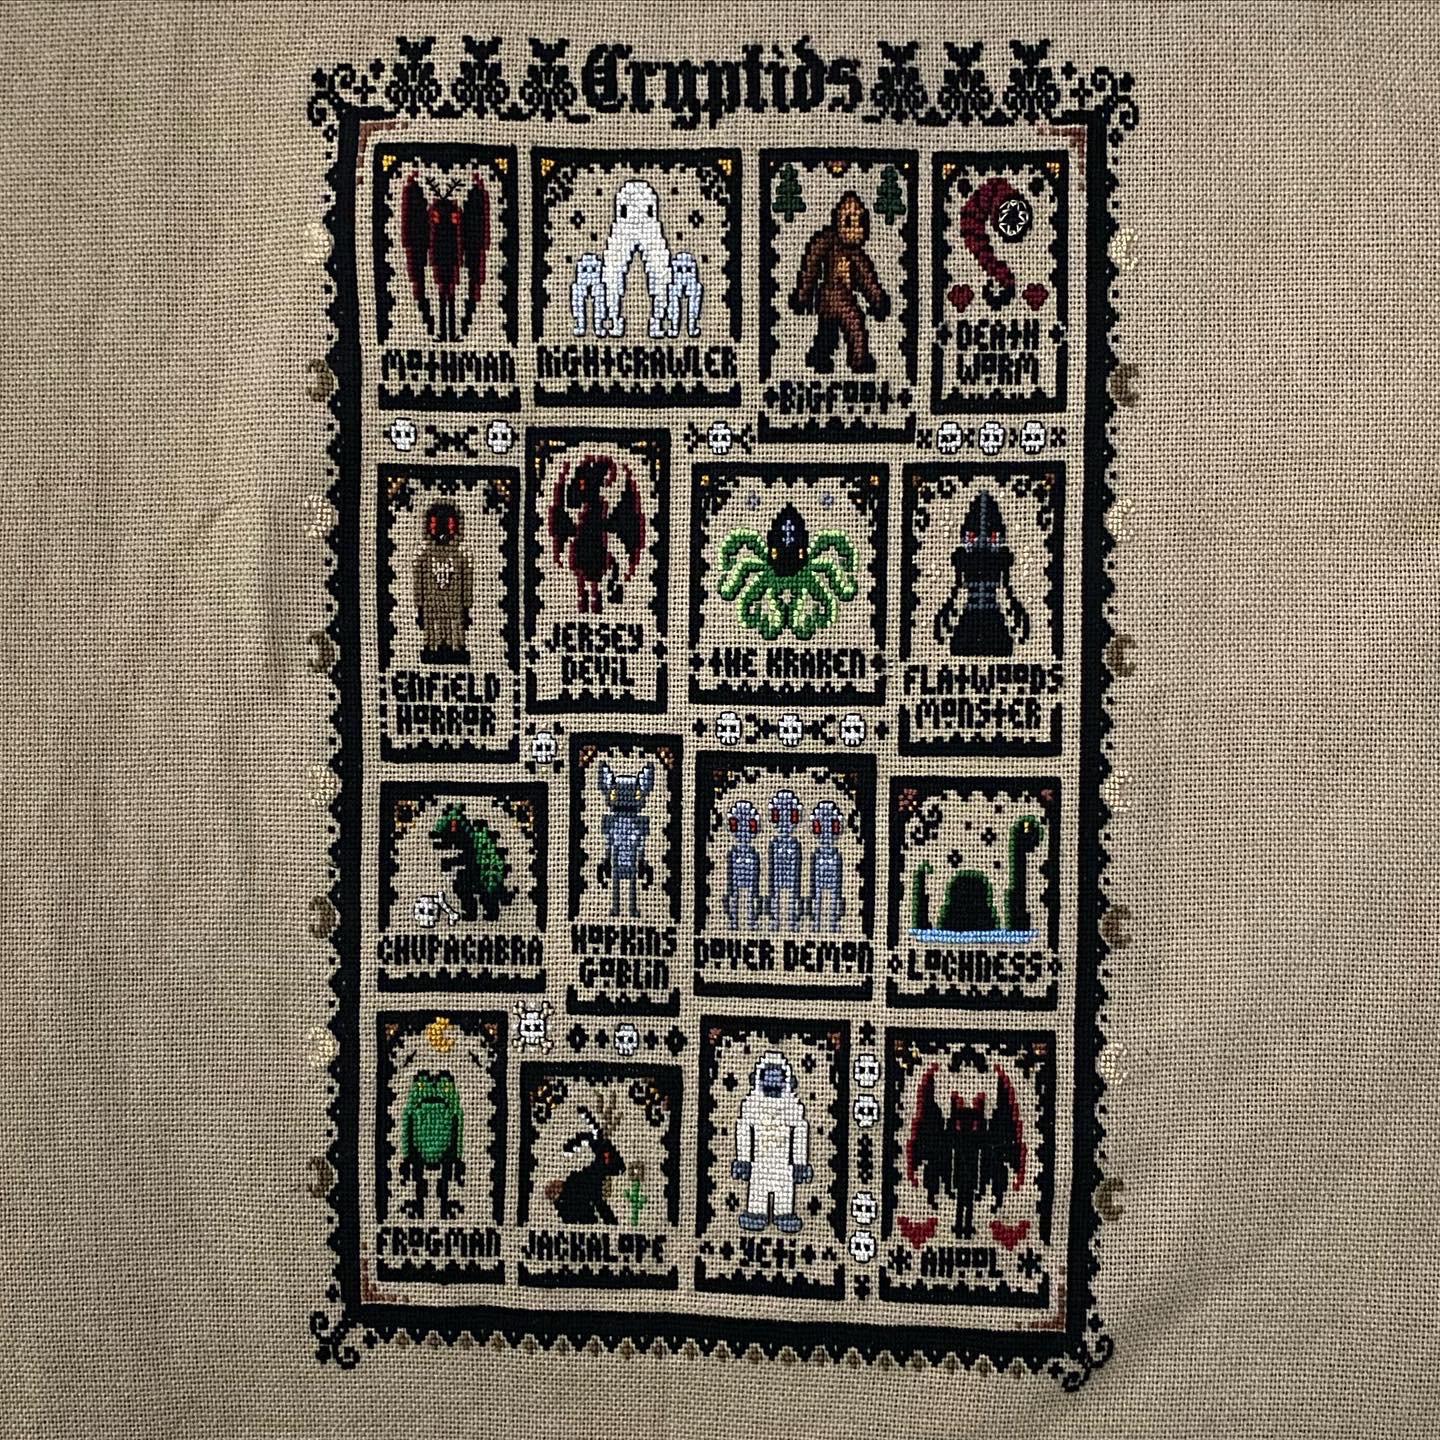 [FO] finally finished The Witchy Stitcher Cryptids Sal